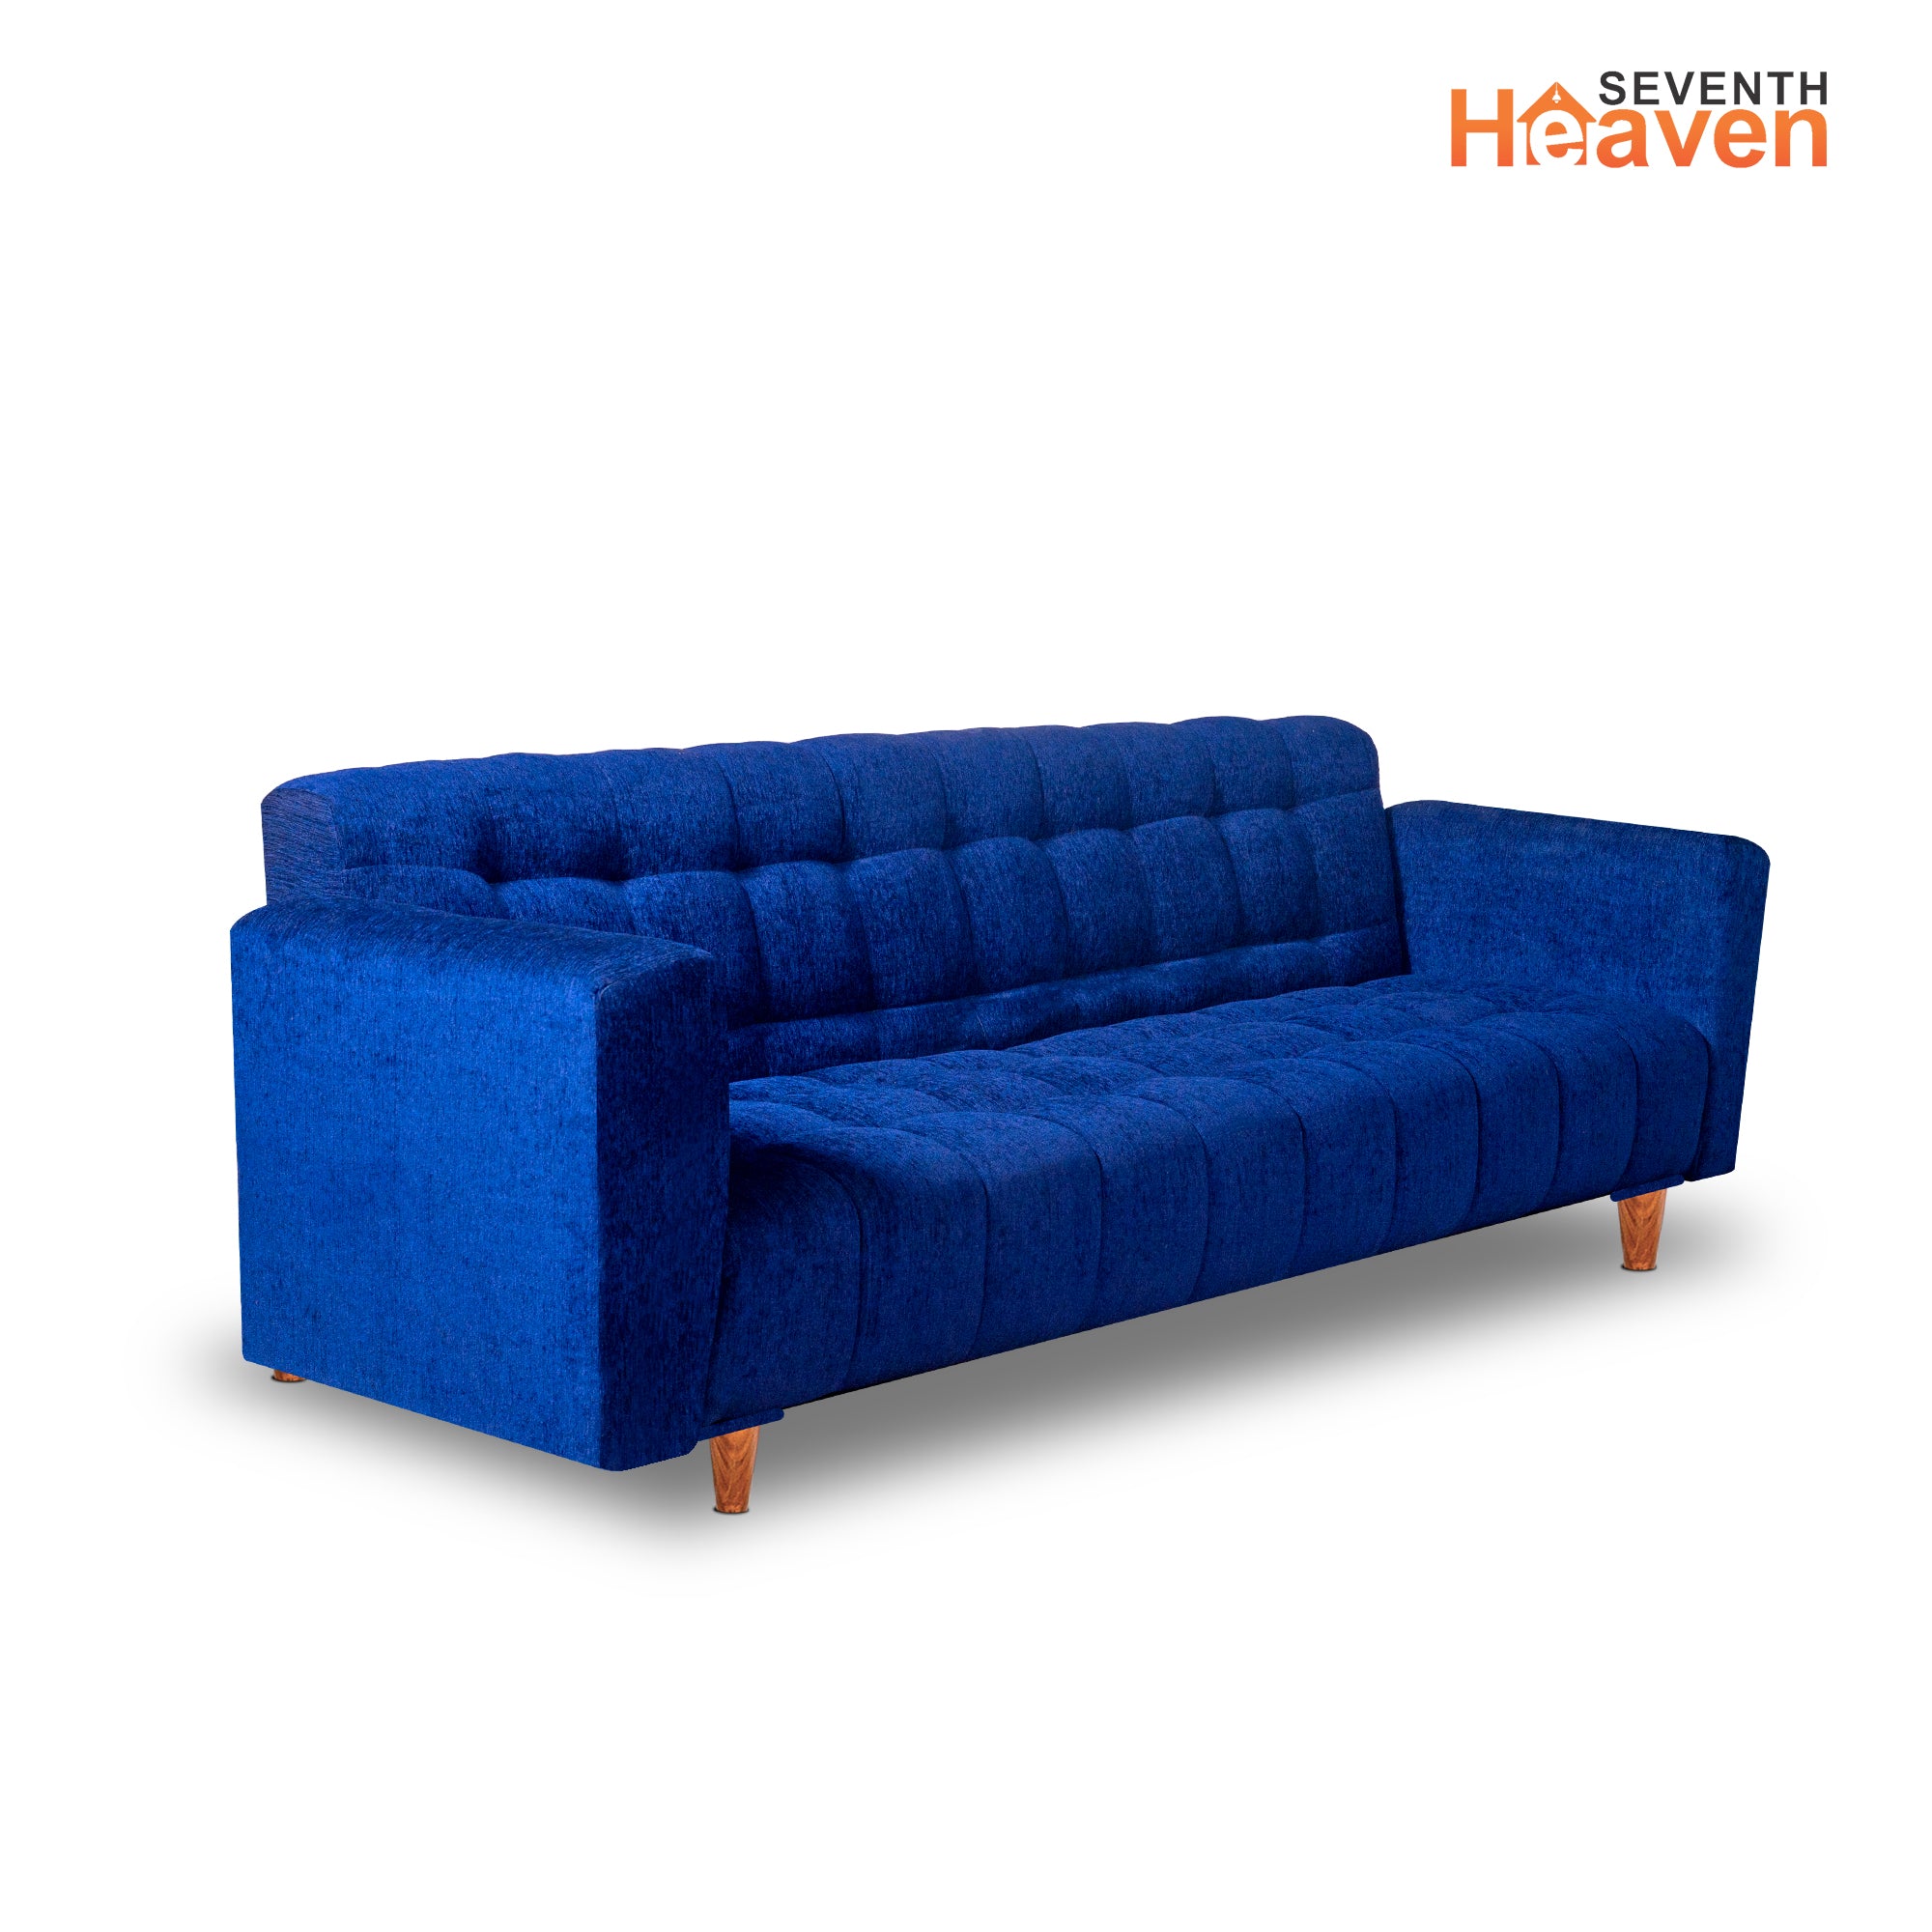 Seventh Heaven 4 Seater Wooden Sofa cum Bed, Chenille Molfino Fabric 72x36x16: 3 Year Warranty 4 Seater Single Solid Wood Pull Out Sofa Cum Bed  (Finish Color - Blue Delivery Condition - DIY(Do-It-Yourself))